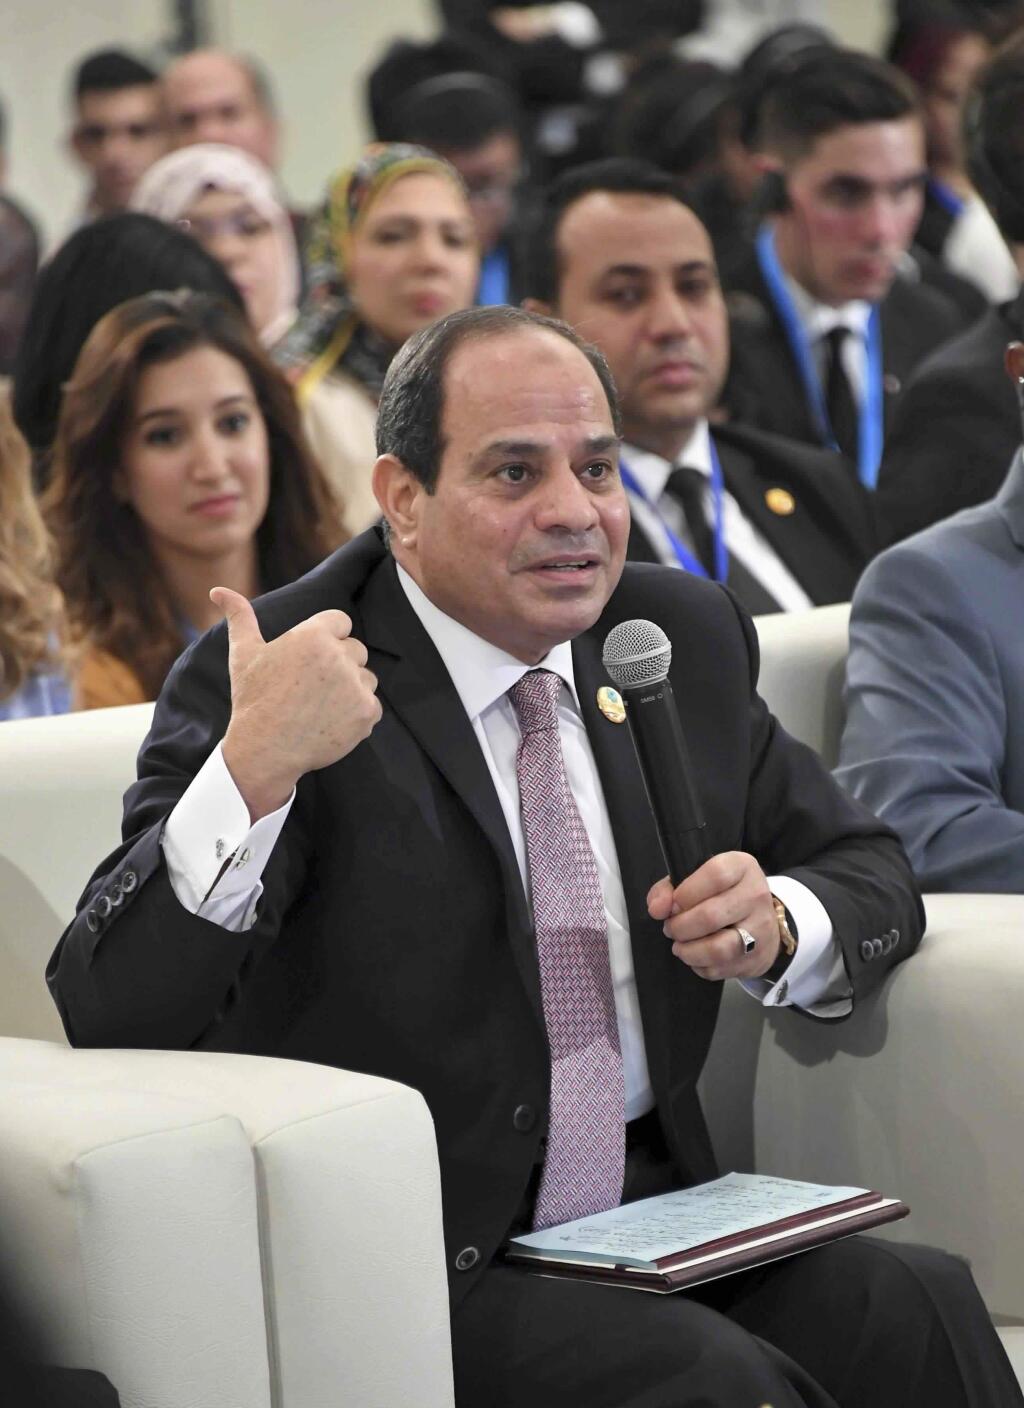 FILE- In this undated file photo provided by Egypt's state news agency, MENA, Egyptian President Abdel-Fattah el-Sissi participates in a panel discussion entitled, ' The role of women in decision making,' at the 'World Youth Forum,' a government-organized event, in the Red Sea resort of Sharm el-Sheikh, Egypt. el-Sissi said Wednesday Nov. 8, 2017, that Iran must stop 'meddling' in the region's affairs and asking for dialogue so that the security of Arab Gulf countries is not be threatened. (MENA file via AP)